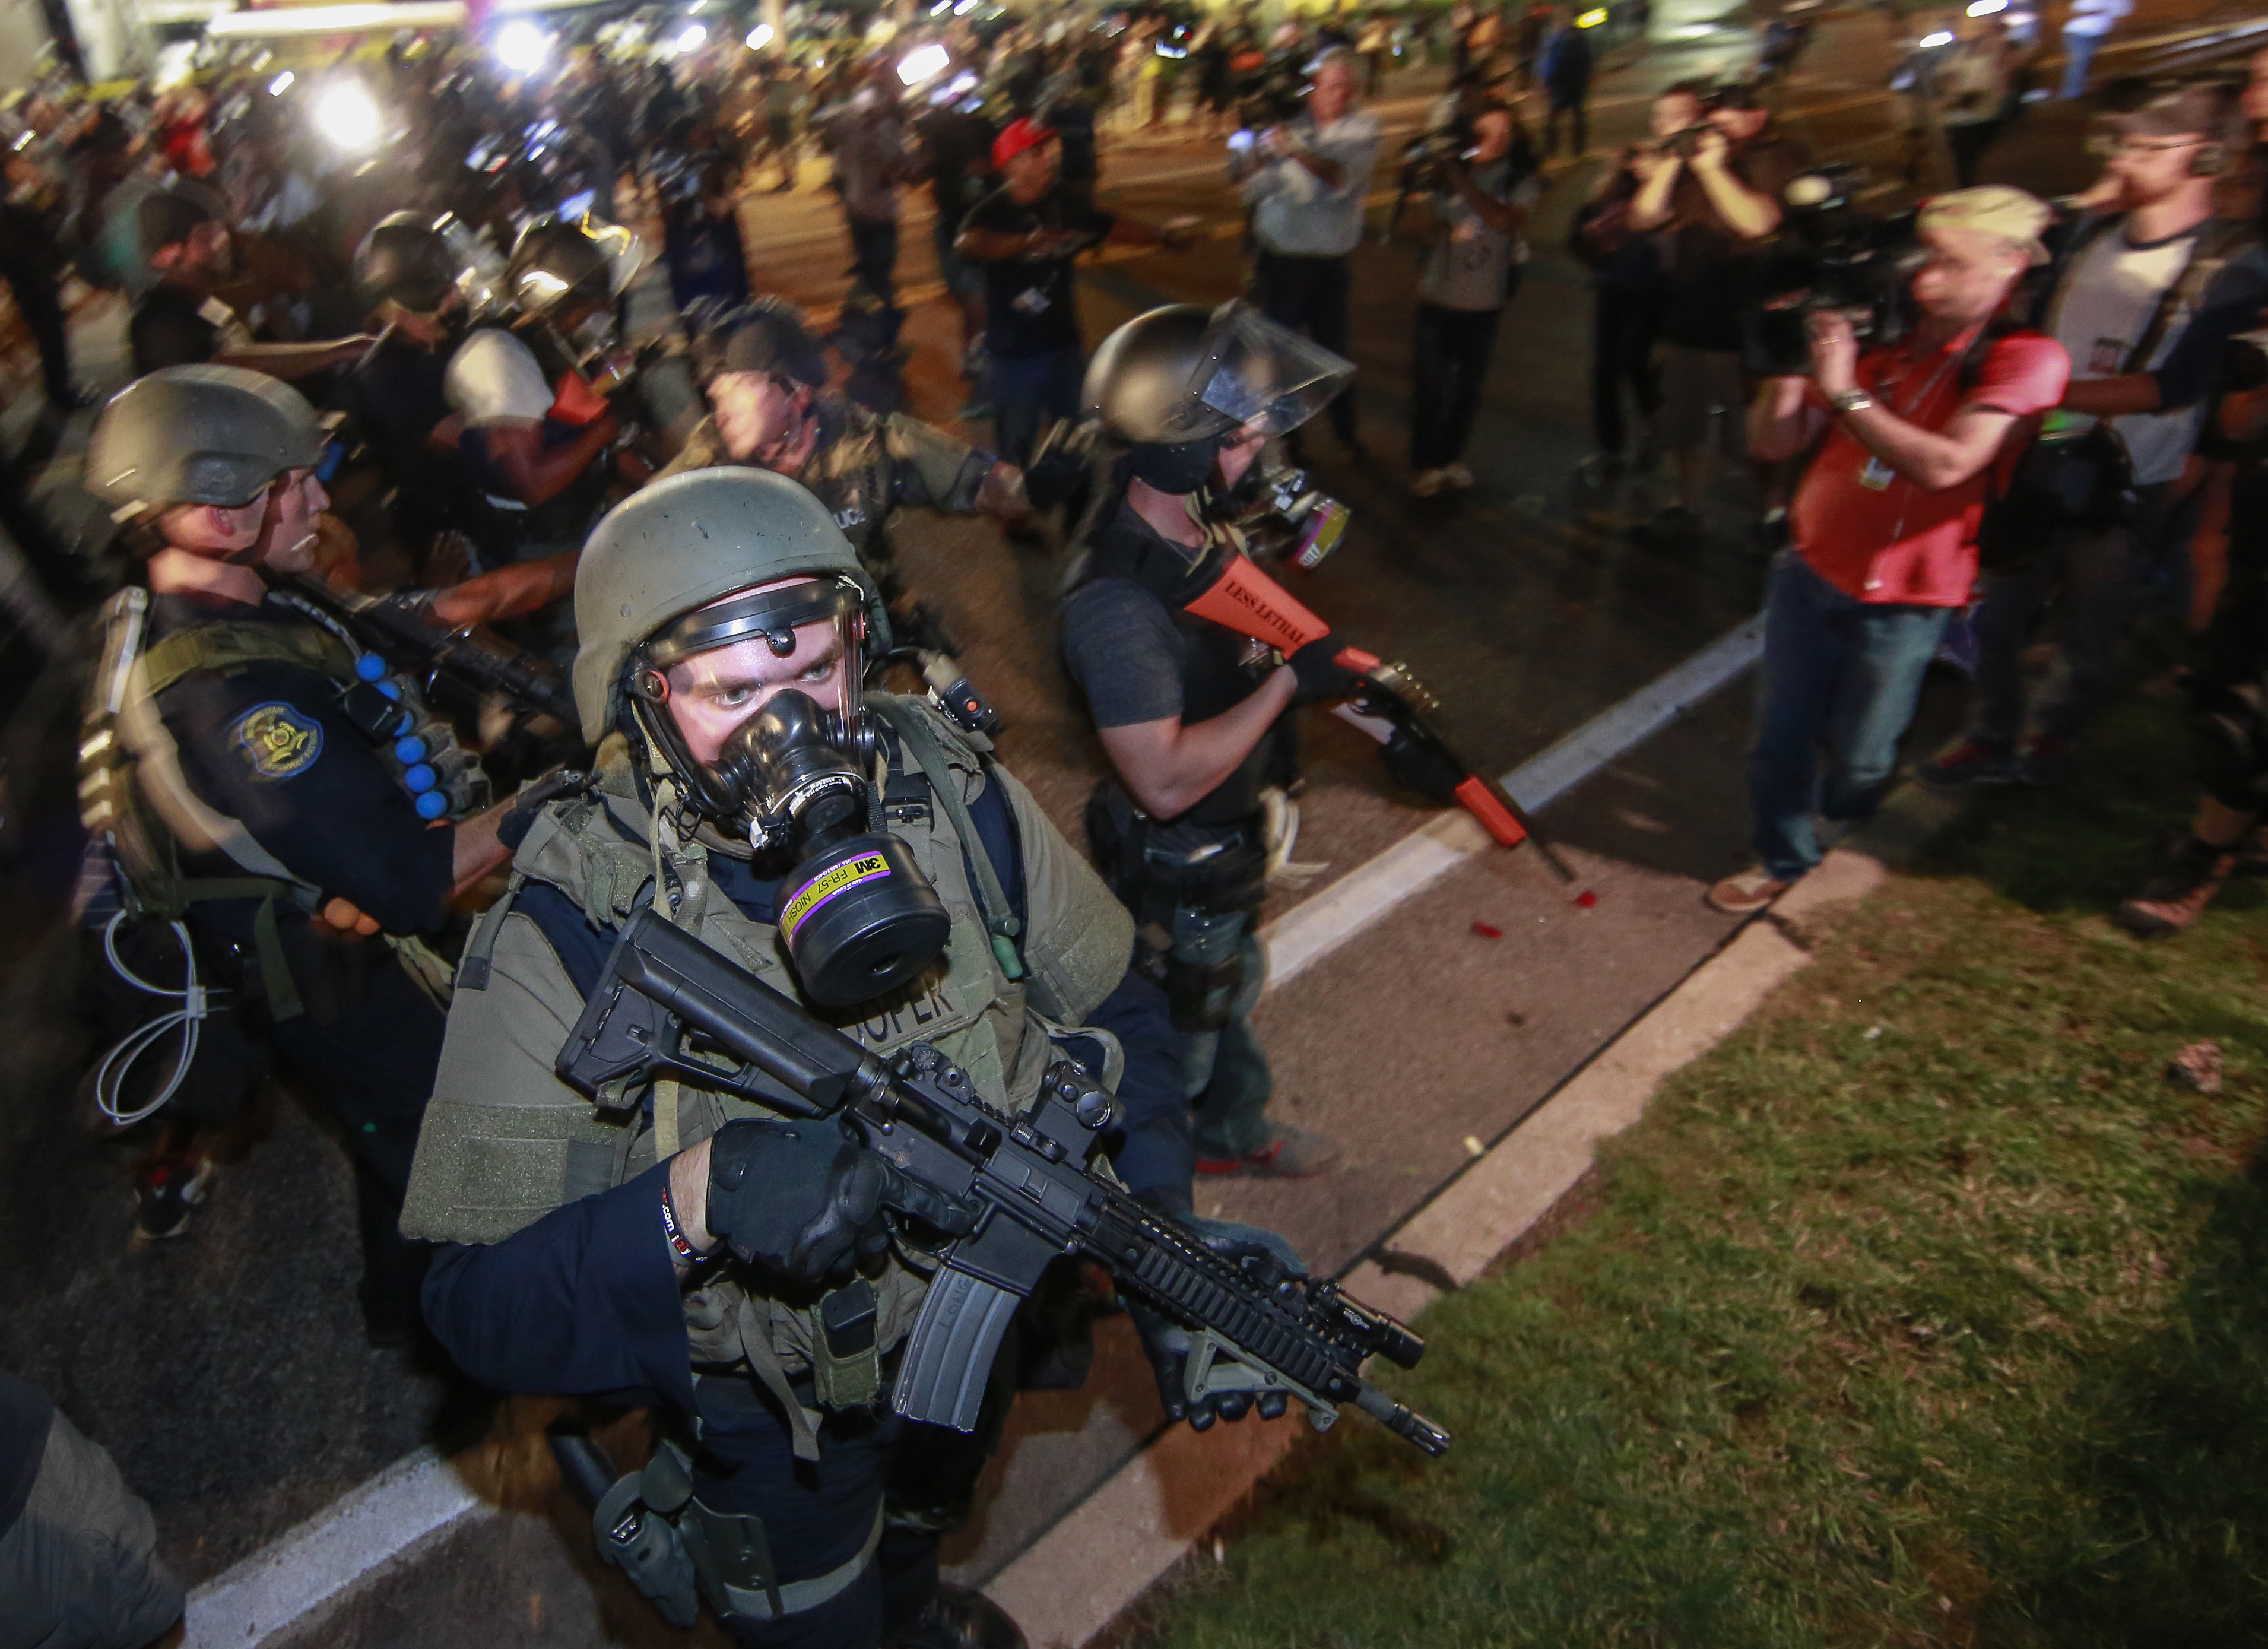 Law enforcement officers watch on during a protest on August 18, 2014 for Michael Brown, who was killed by a police officer on August 9 in Ferguson, United States. (Anadolu Agency—Getty Images)